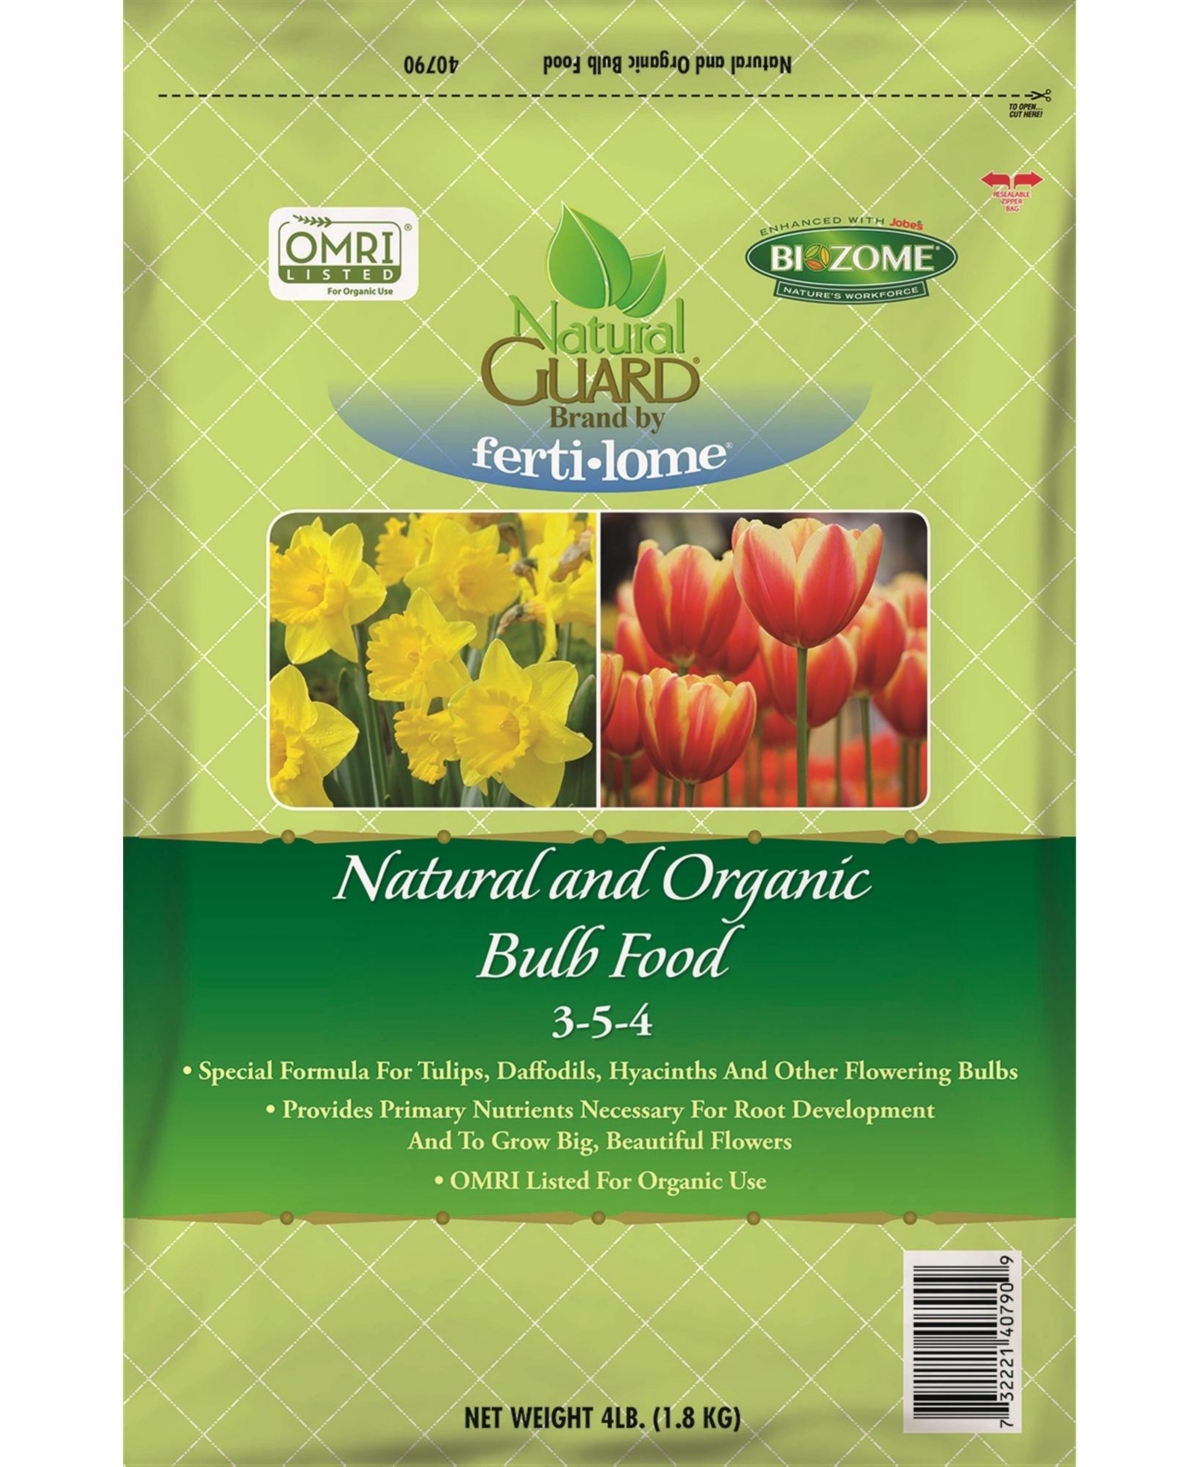 Natural Guard Natural and Organic Bulb Food 3-5-4, 4lbs - Open Misce